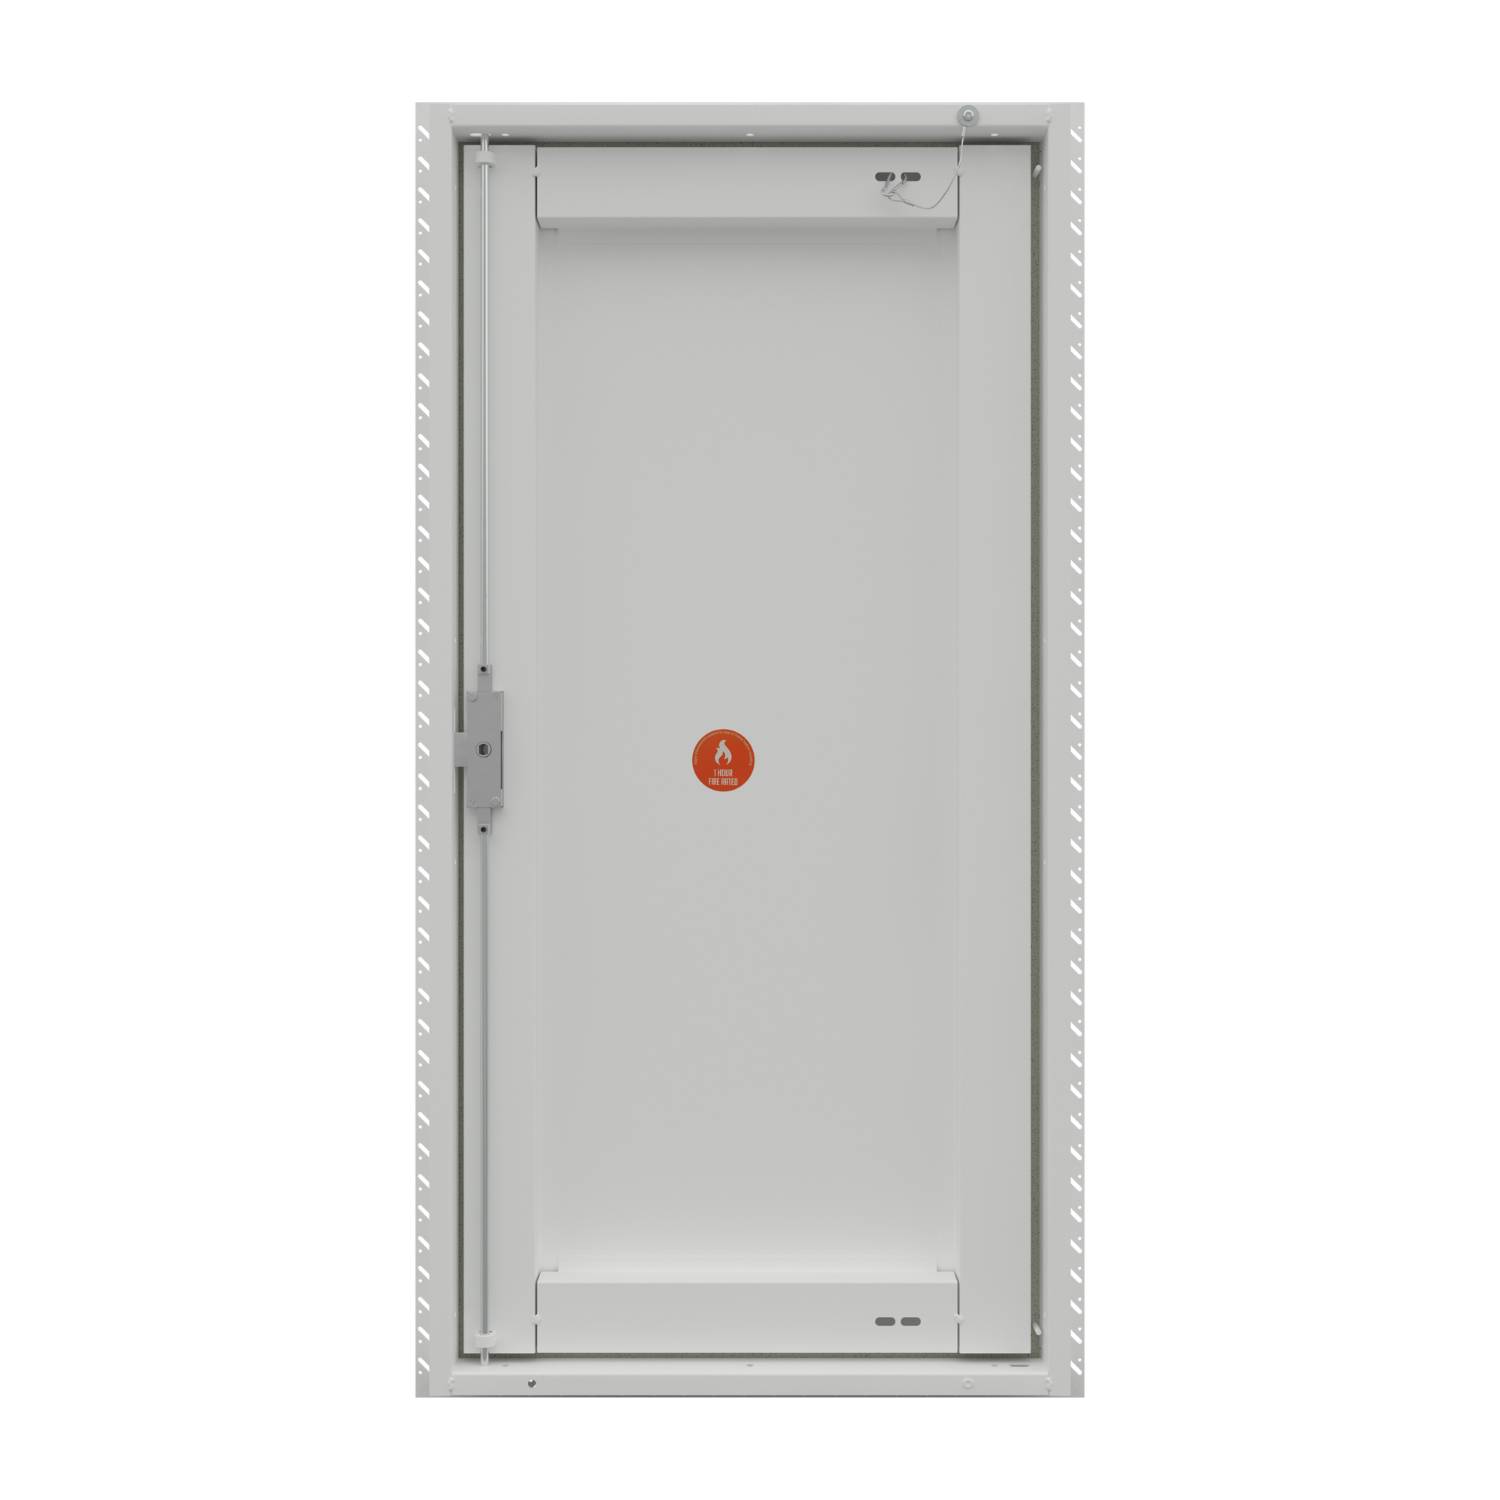 Metal Riser Door (EX51 Range) - Beaded Frame - 2 Hour Fire Rated From the Face & Rear - Smoke Tested - Wall Access Panel